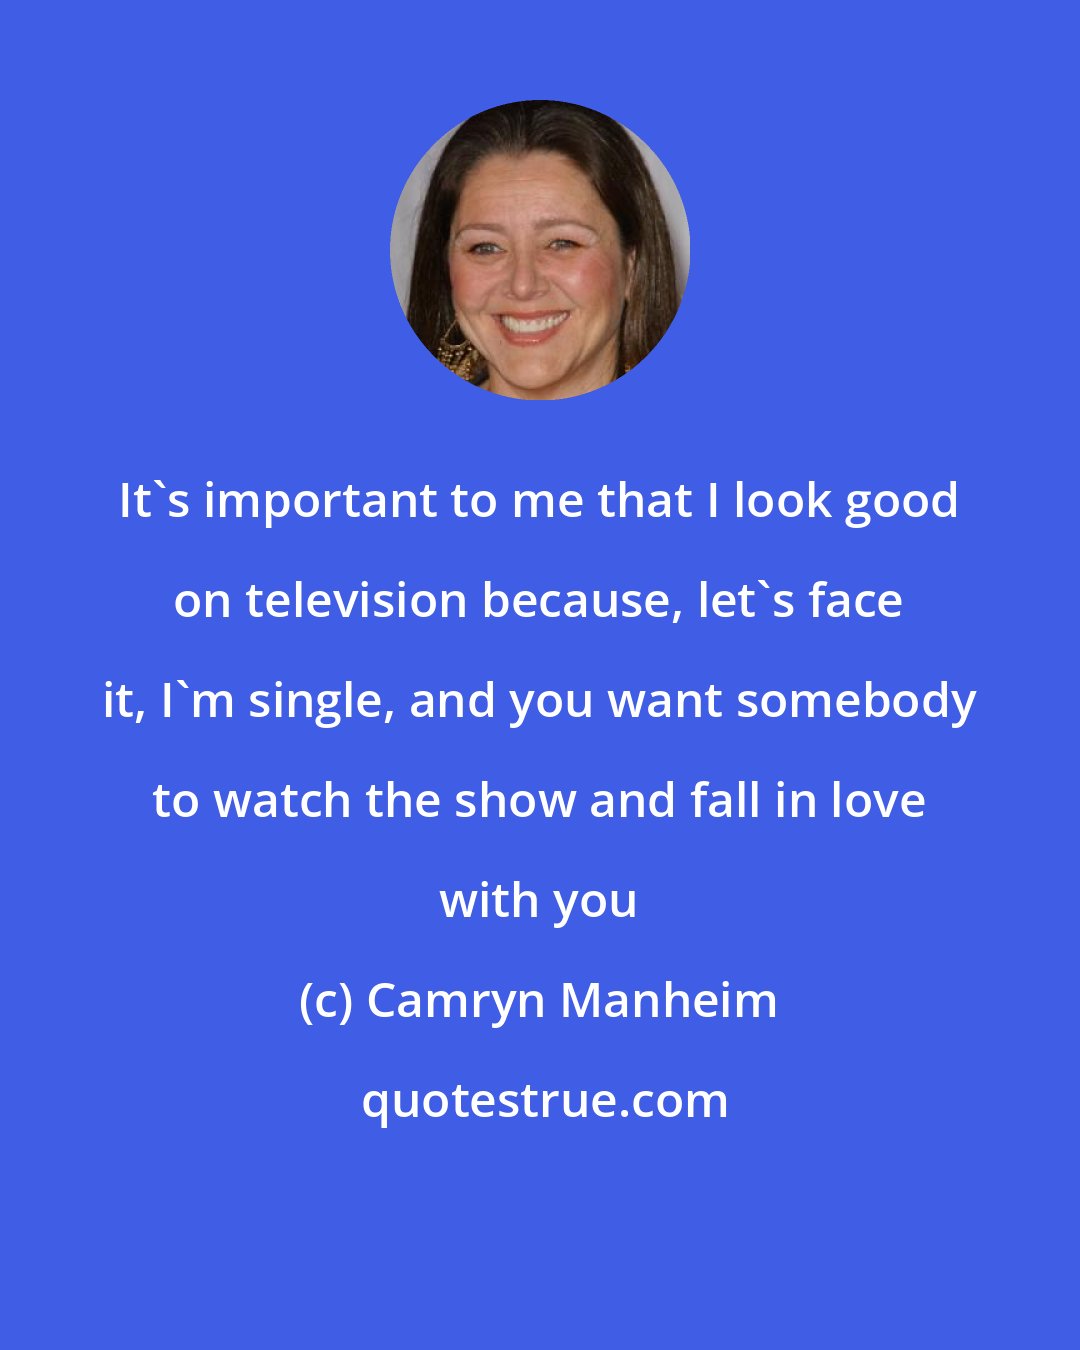 Camryn Manheim: It's important to me that I look good on television because, let's face it, I'm single, and you want somebody to watch the show and fall in love with you